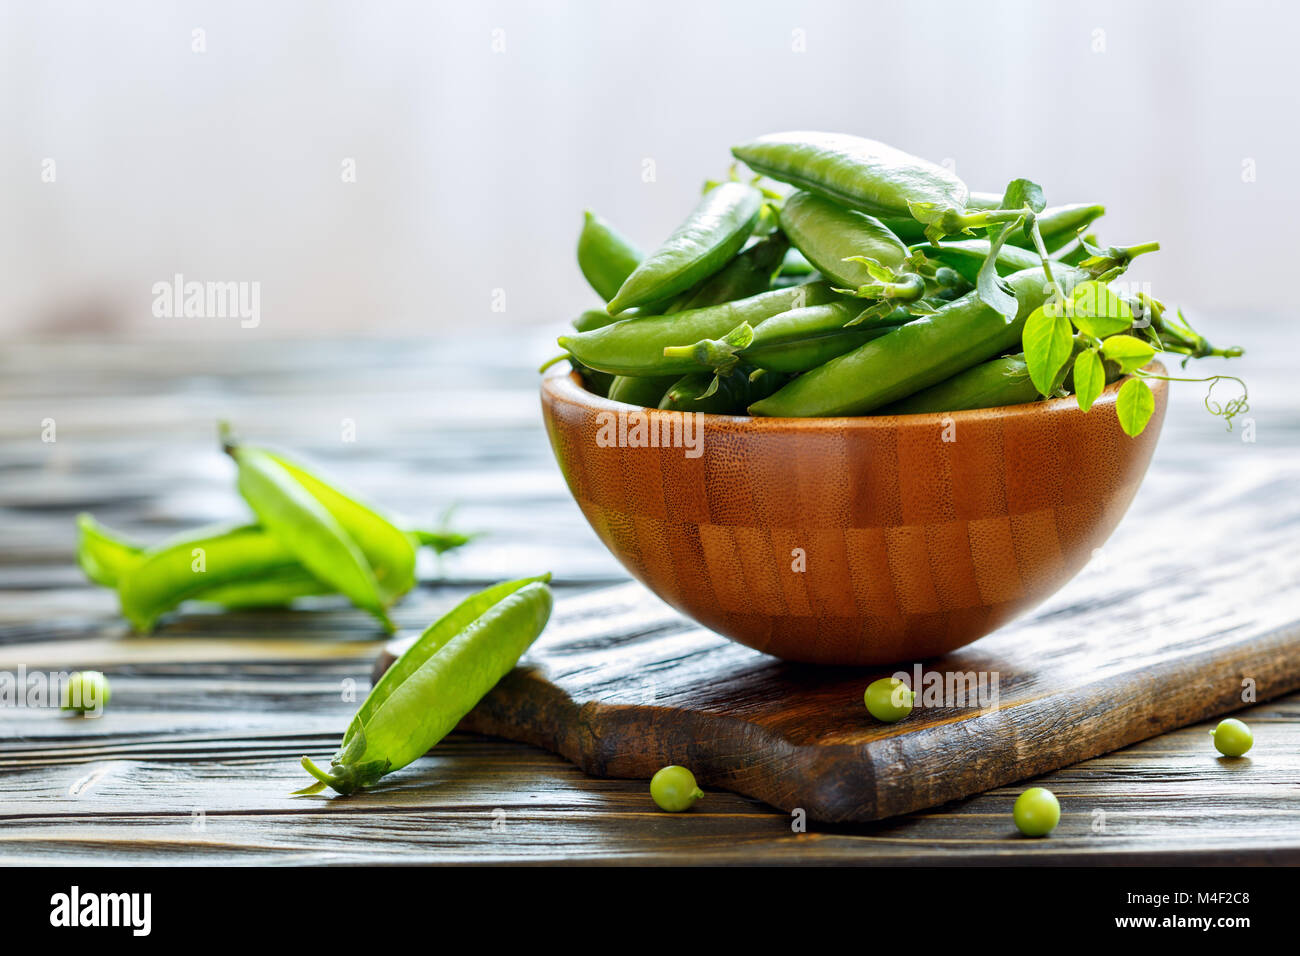 Wooden bowl with green pea pods. Stock Photo